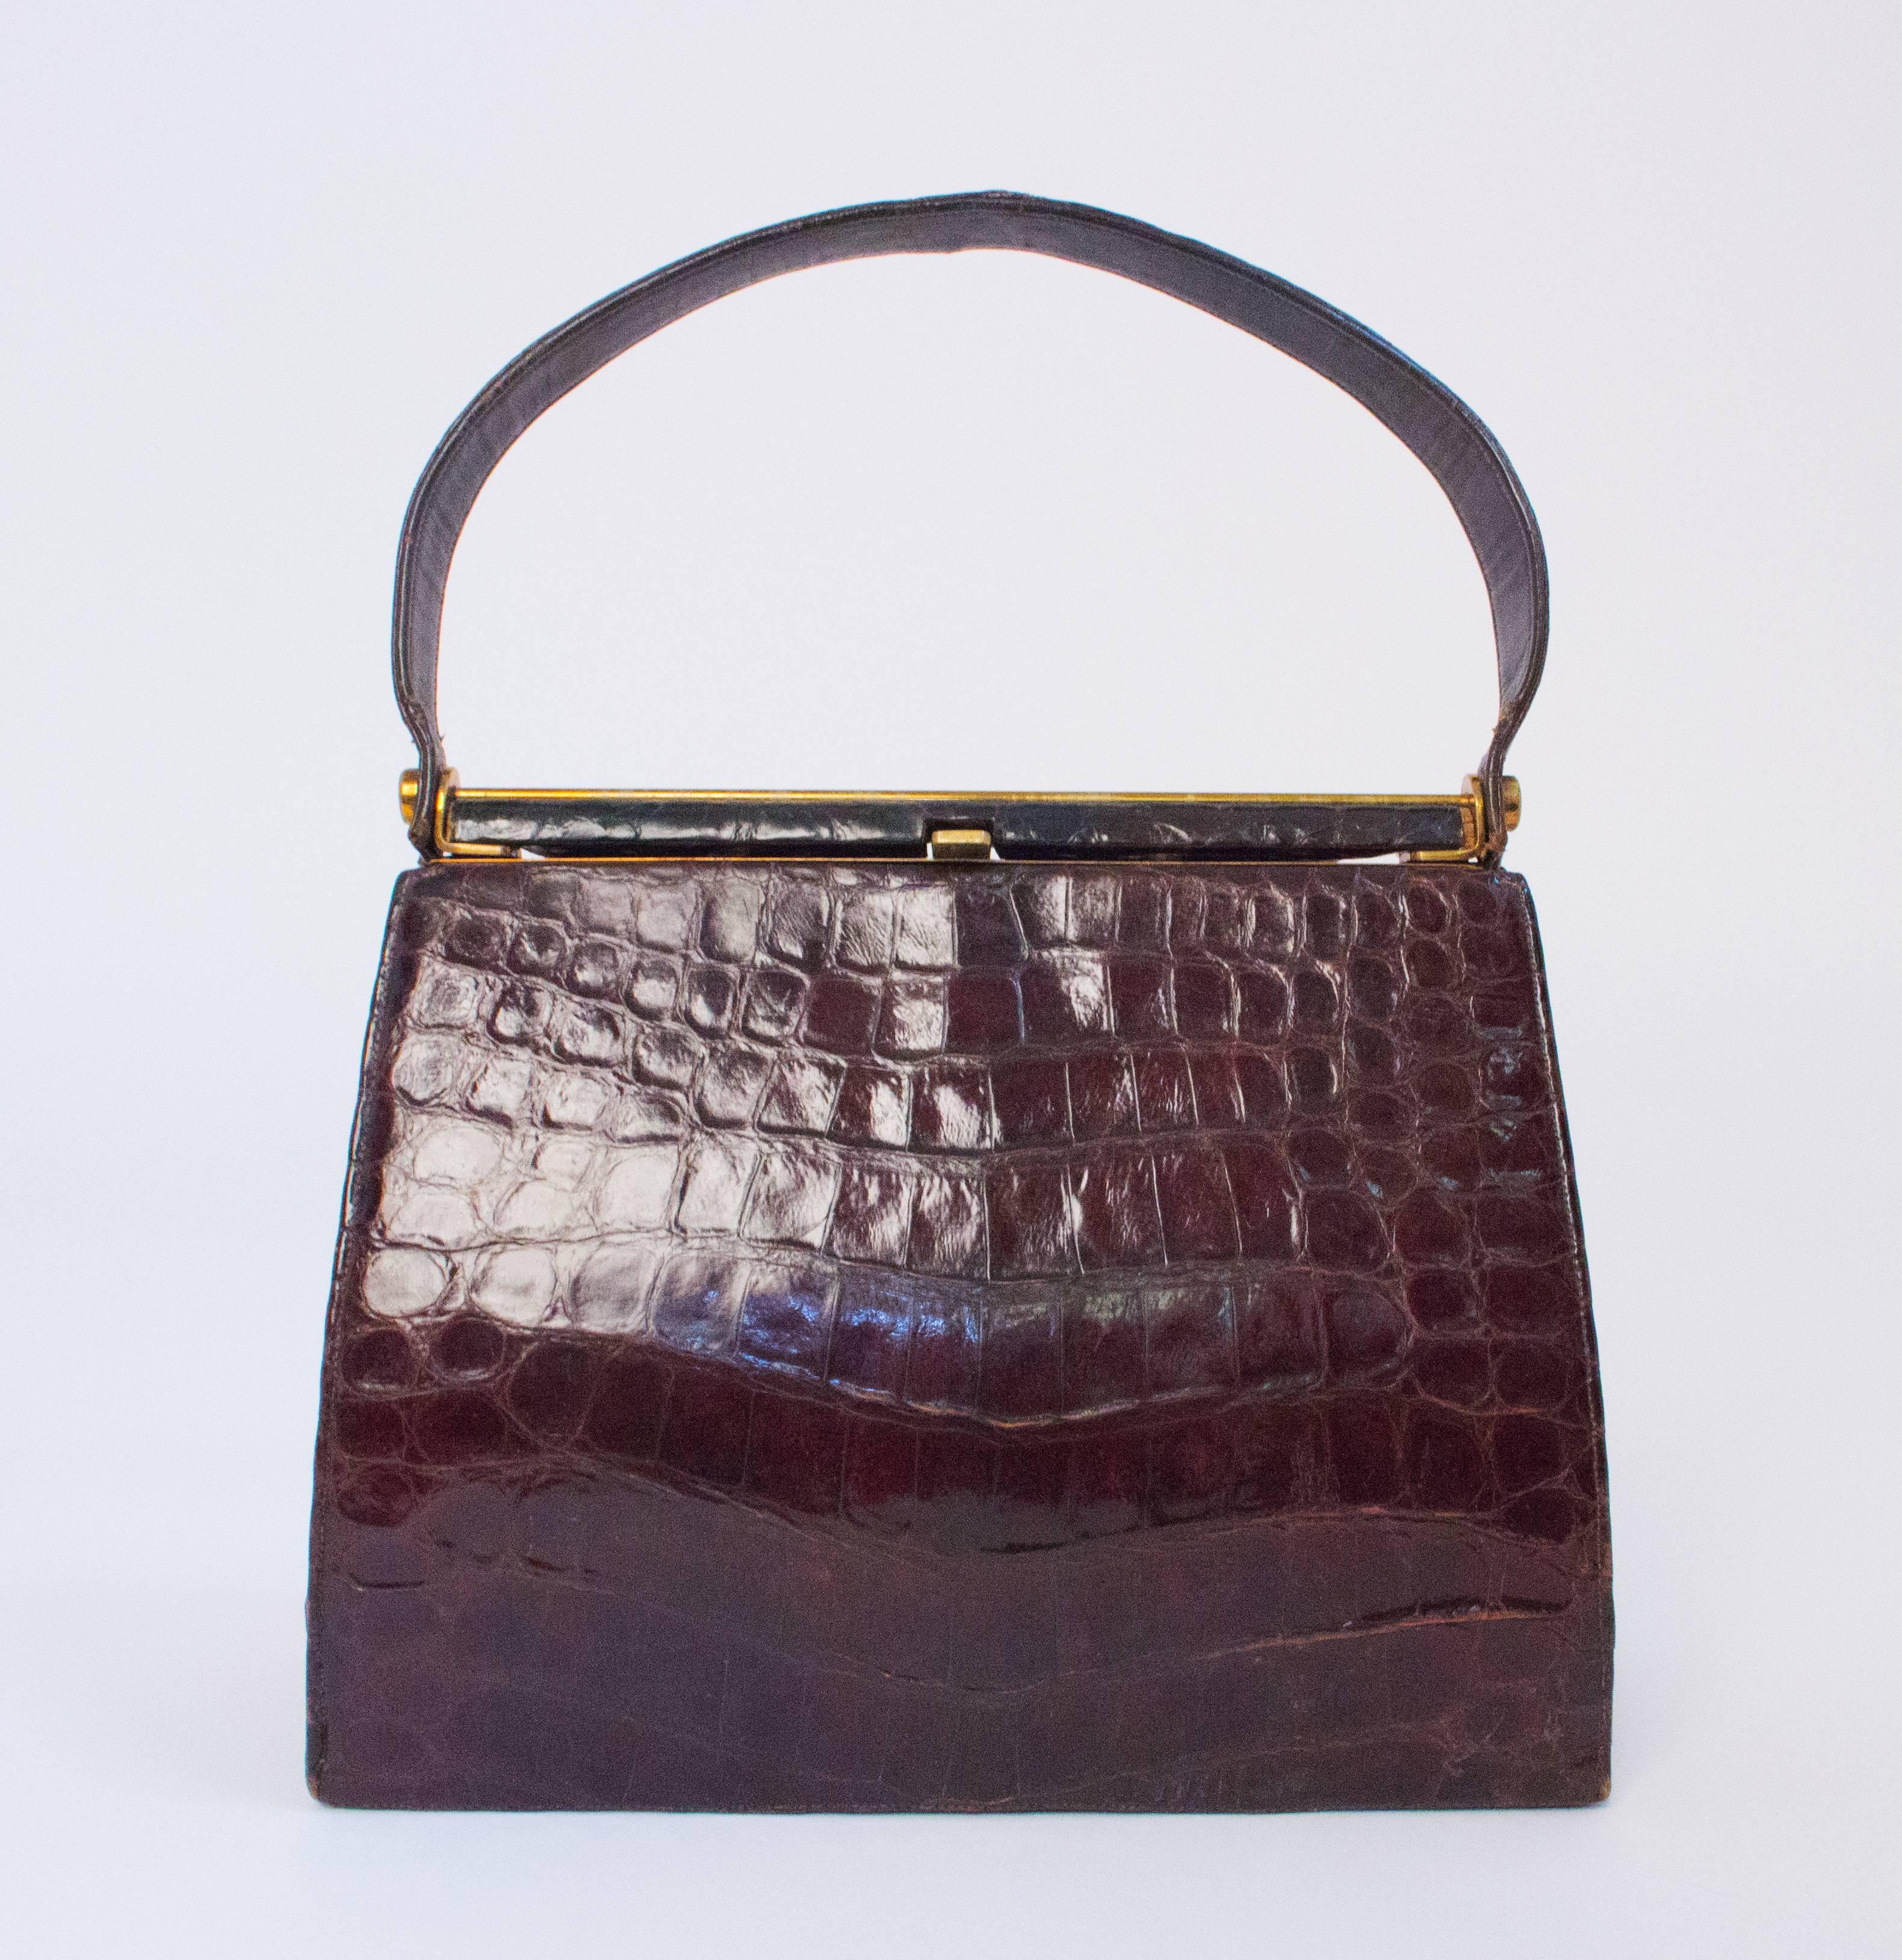 50s / 60s alligator handbag. Gold tone hardward. Leather interior. 3 interior pockets. I interior zippered pocket. Has feet.

Measurements:
Body of bag: approx. 10 1/2 x 9 inches 
Handle: 17 inches 